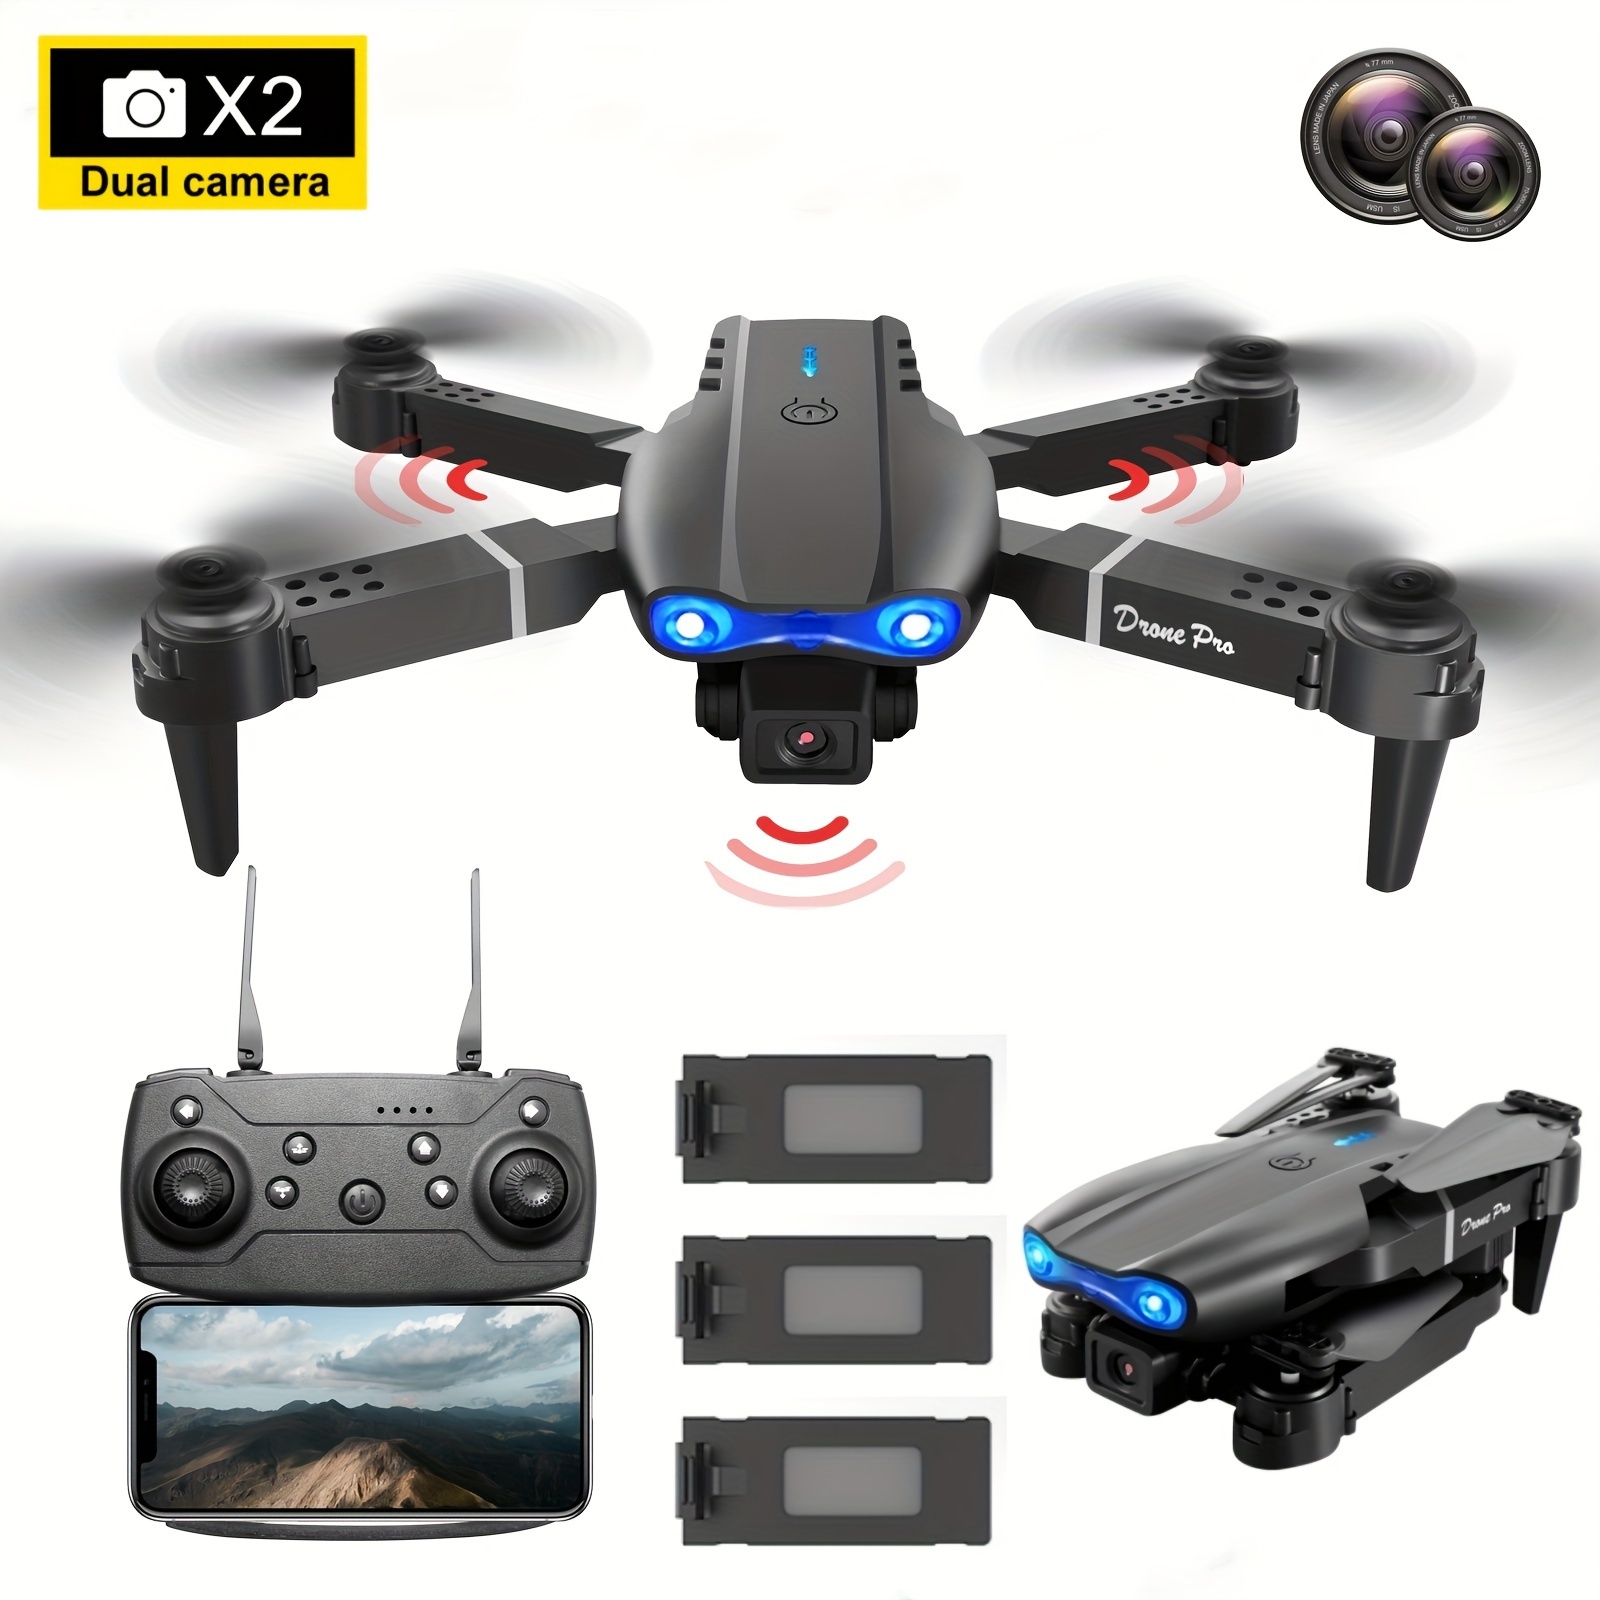 3.5 Channel Rc Helicopter Wireless Remote Control 4d m5 - Temu